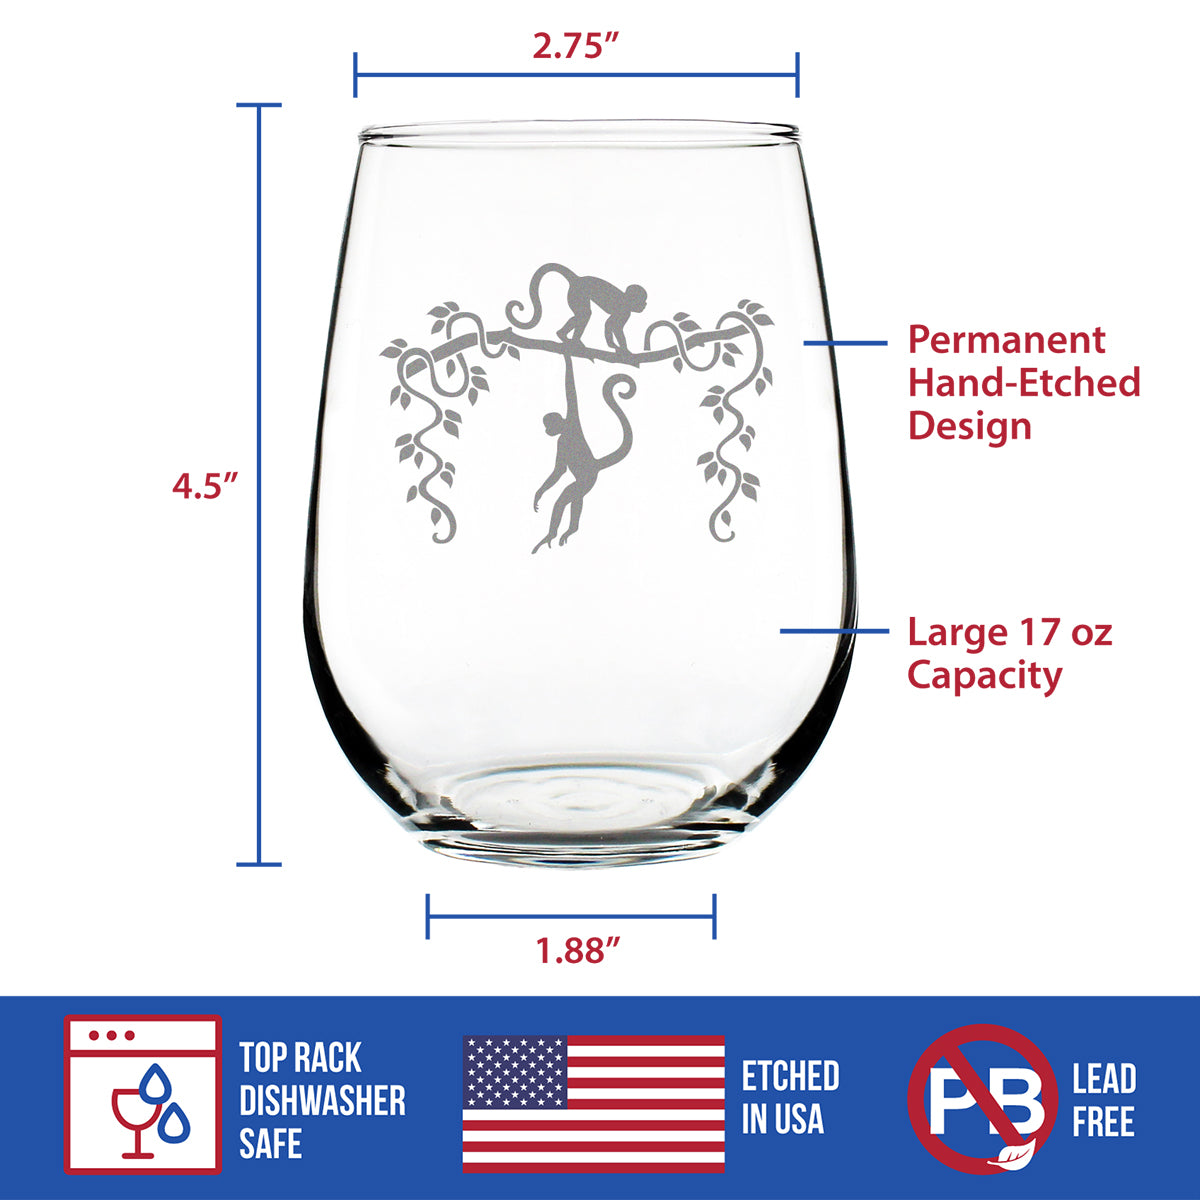 Monkey Stemless Wine Glass - Fun Wild Animal Themed Decor and Gifts for Lovers of Apes and Monkeys - Large 17 Oz Glasses